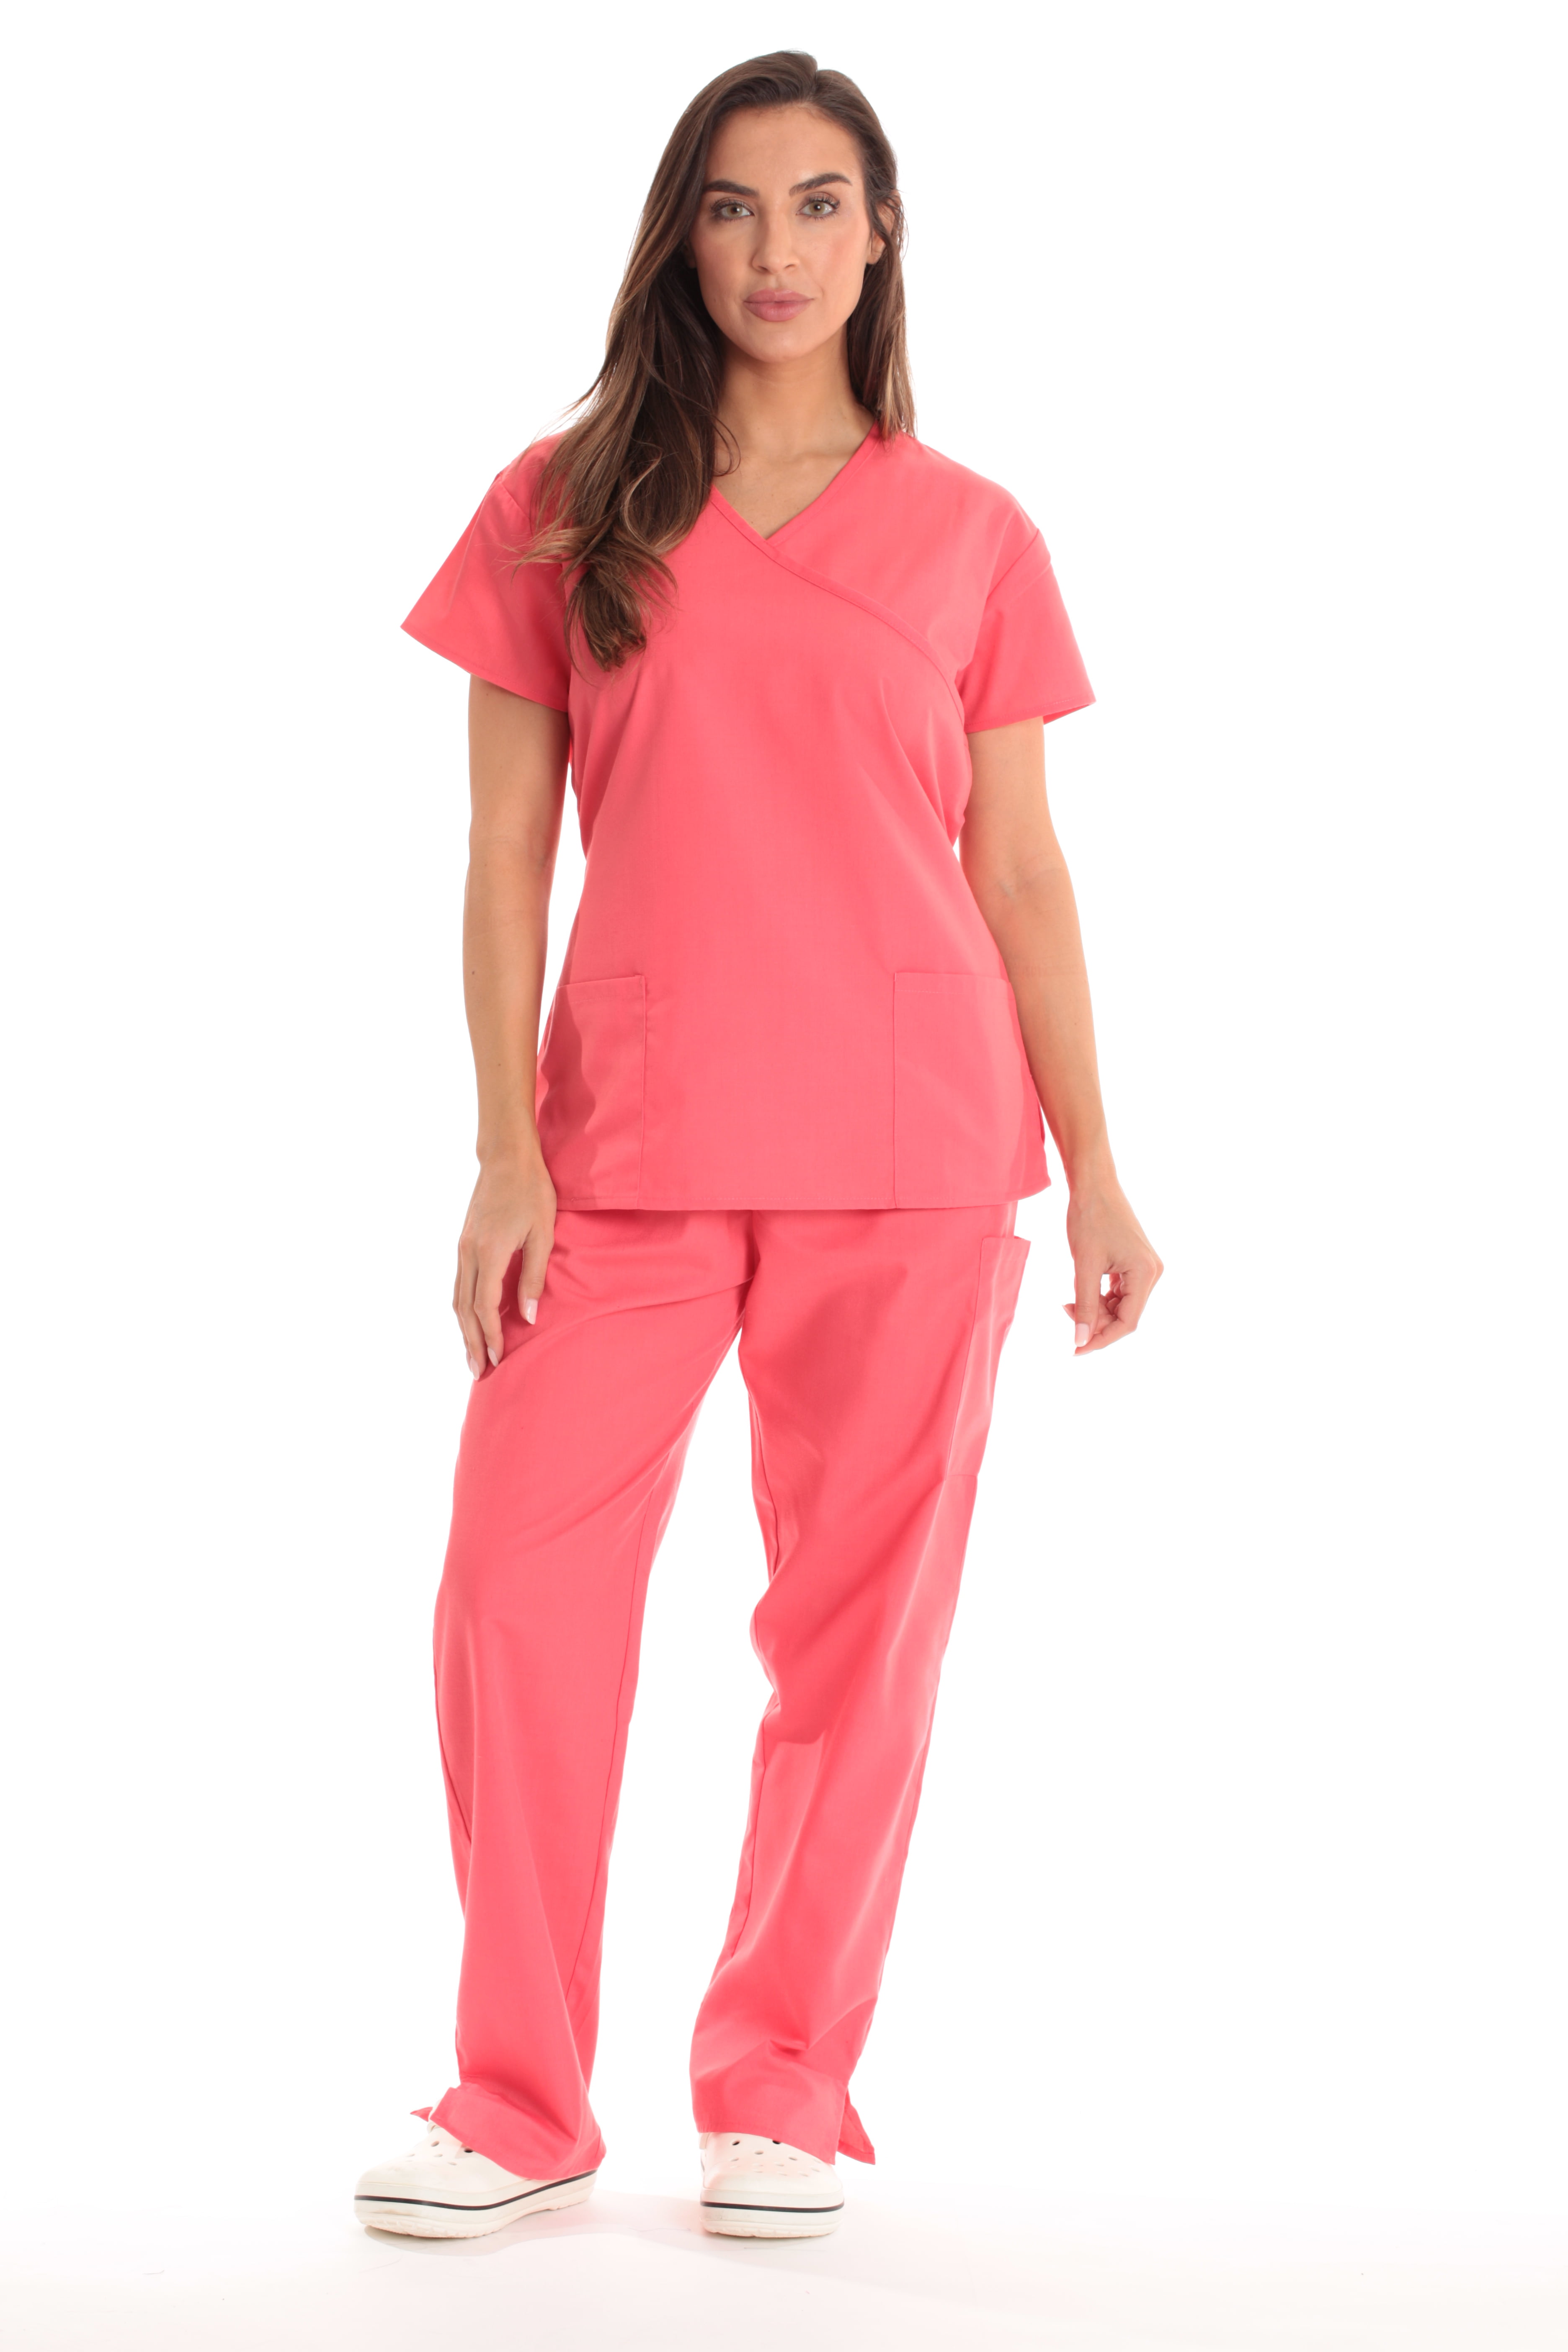 Just Love Women's Medical Scrub Sets with Tie-Back - Comfortable and  Durable Scrubs (Coral, Small)